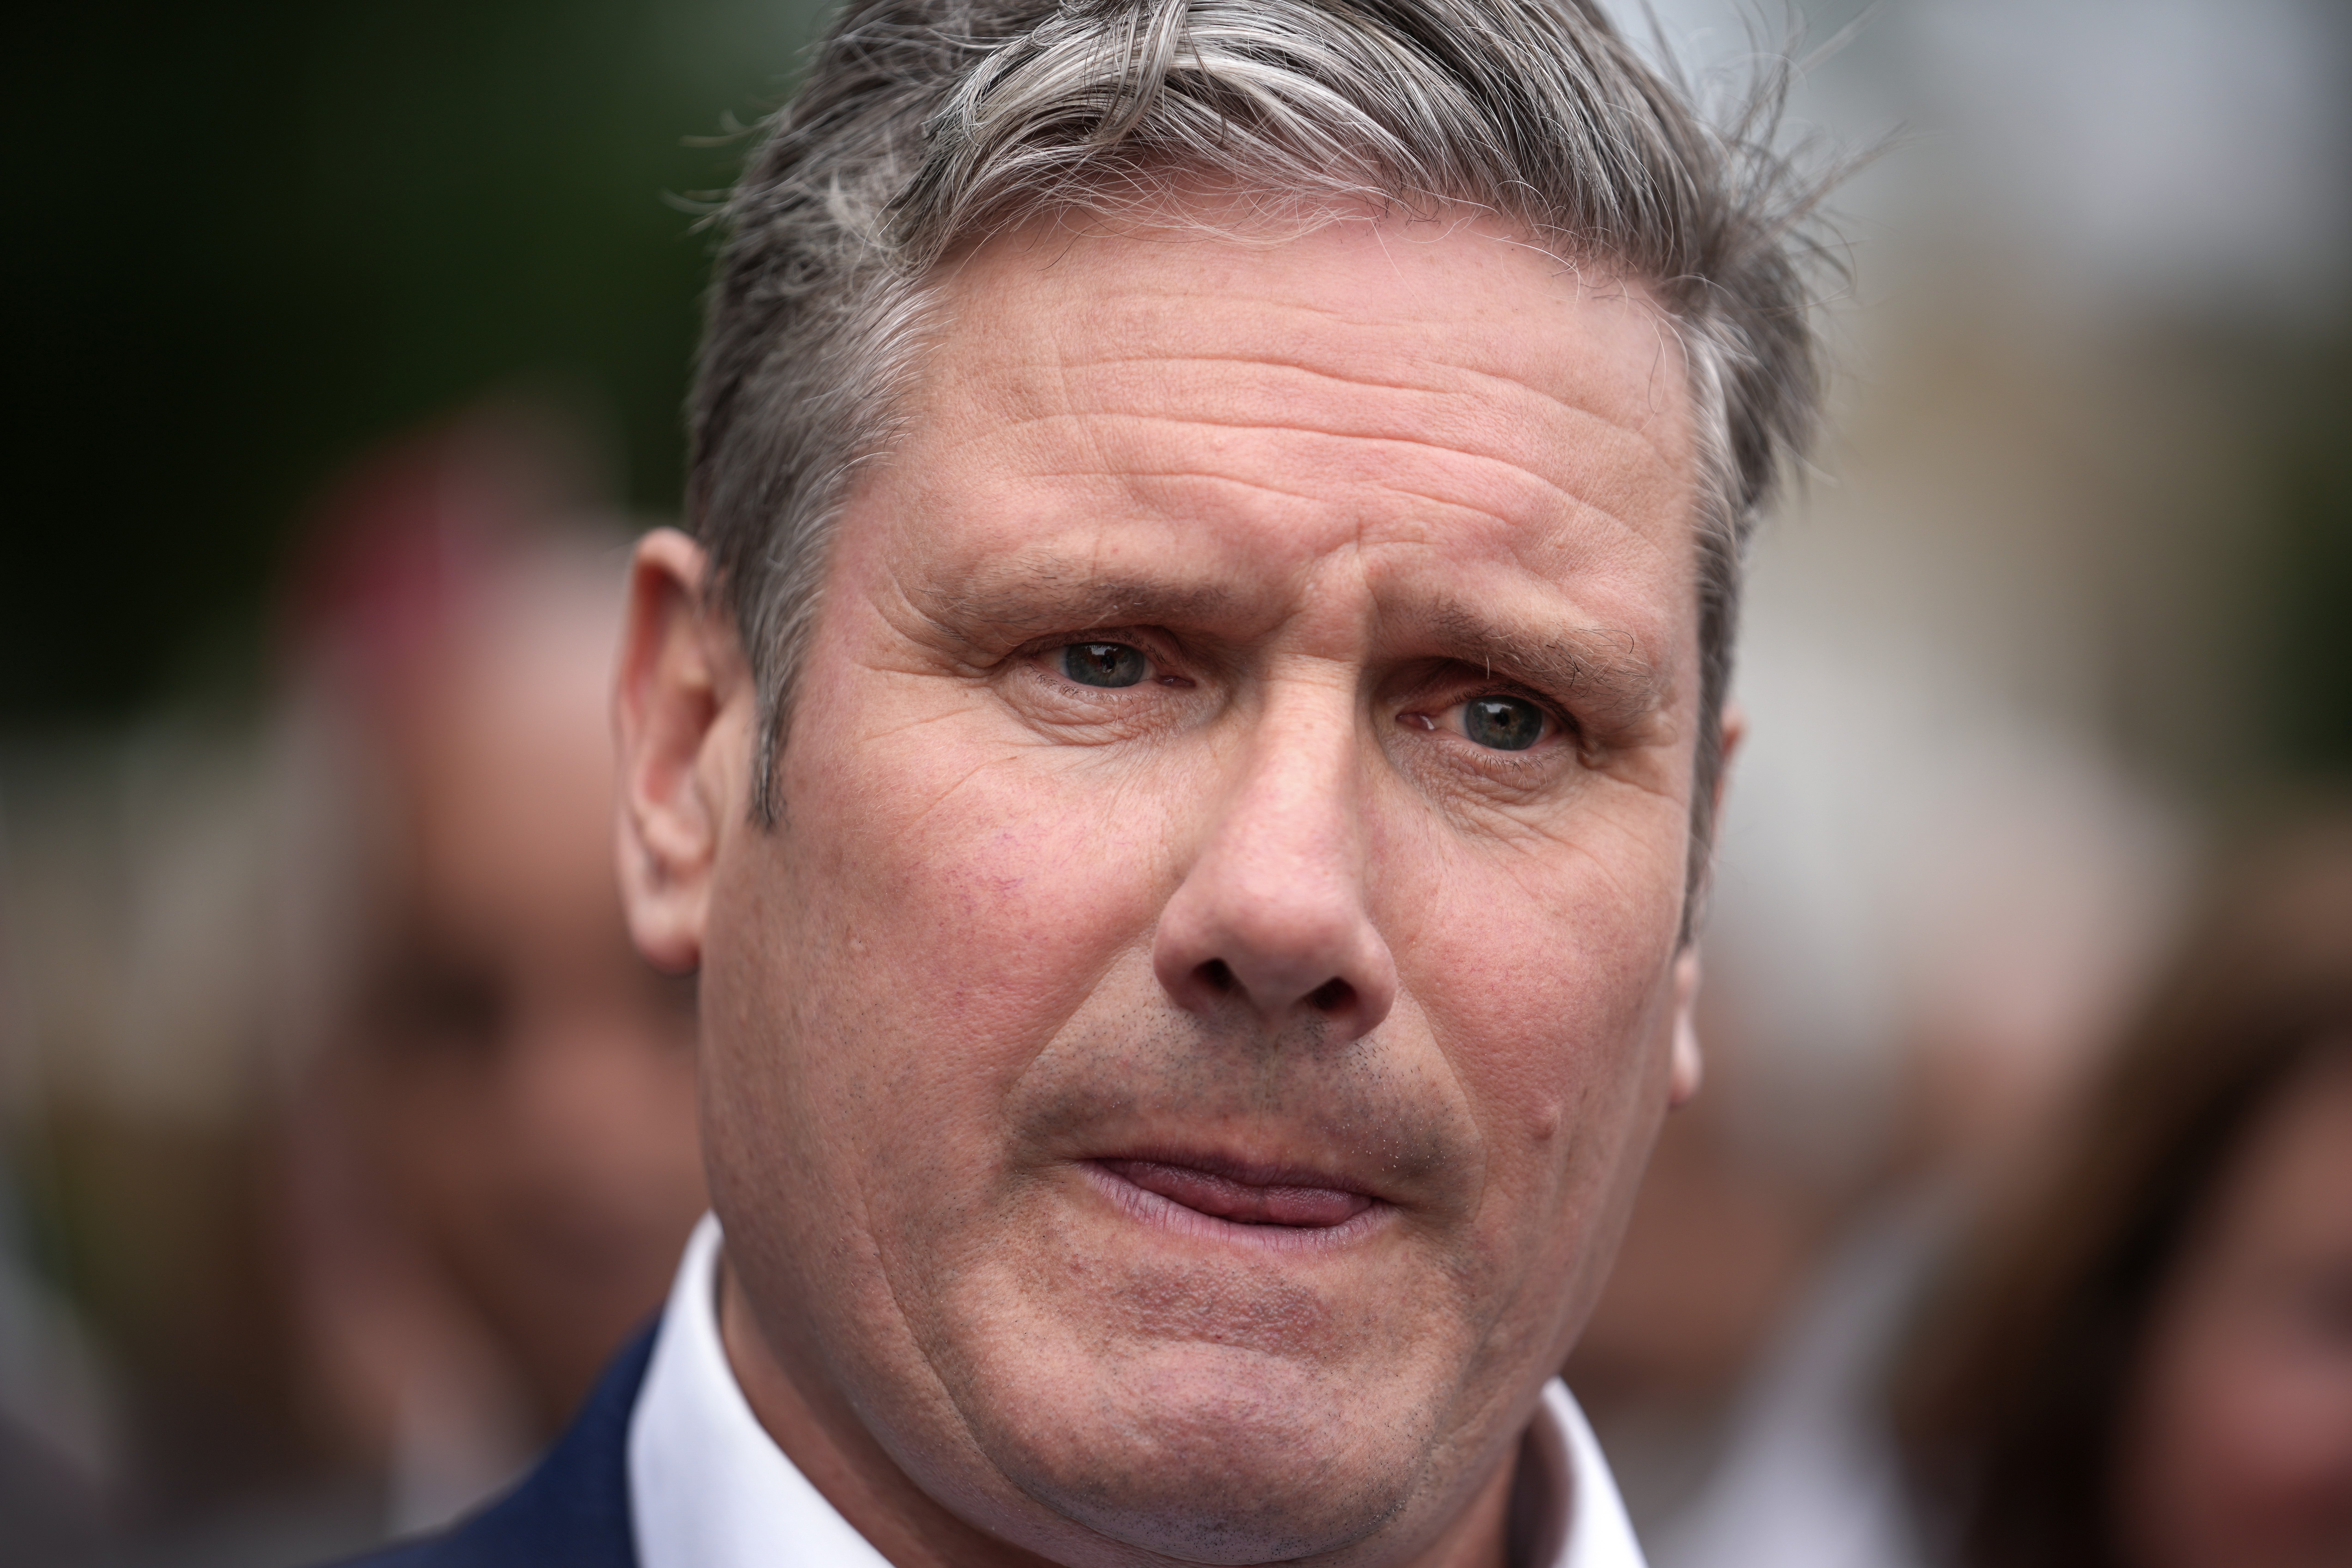 Keir Starmer faces a difficult start to his first in-person conference as leader